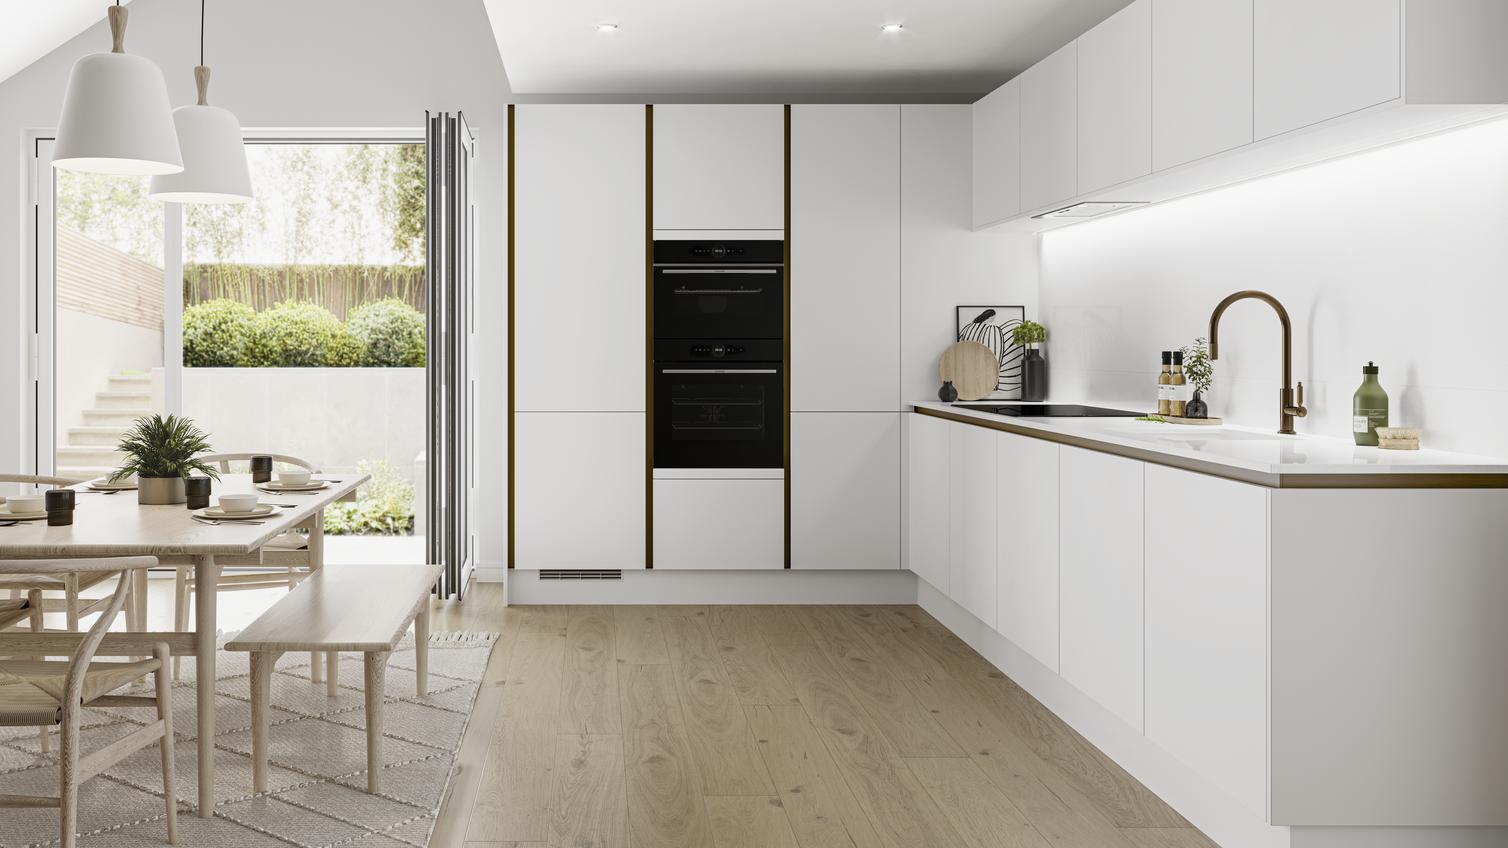 Contemporary L-shaped white kitchen idea with matt slab cupboard doors and a handleless design. Has white trims and worktops.